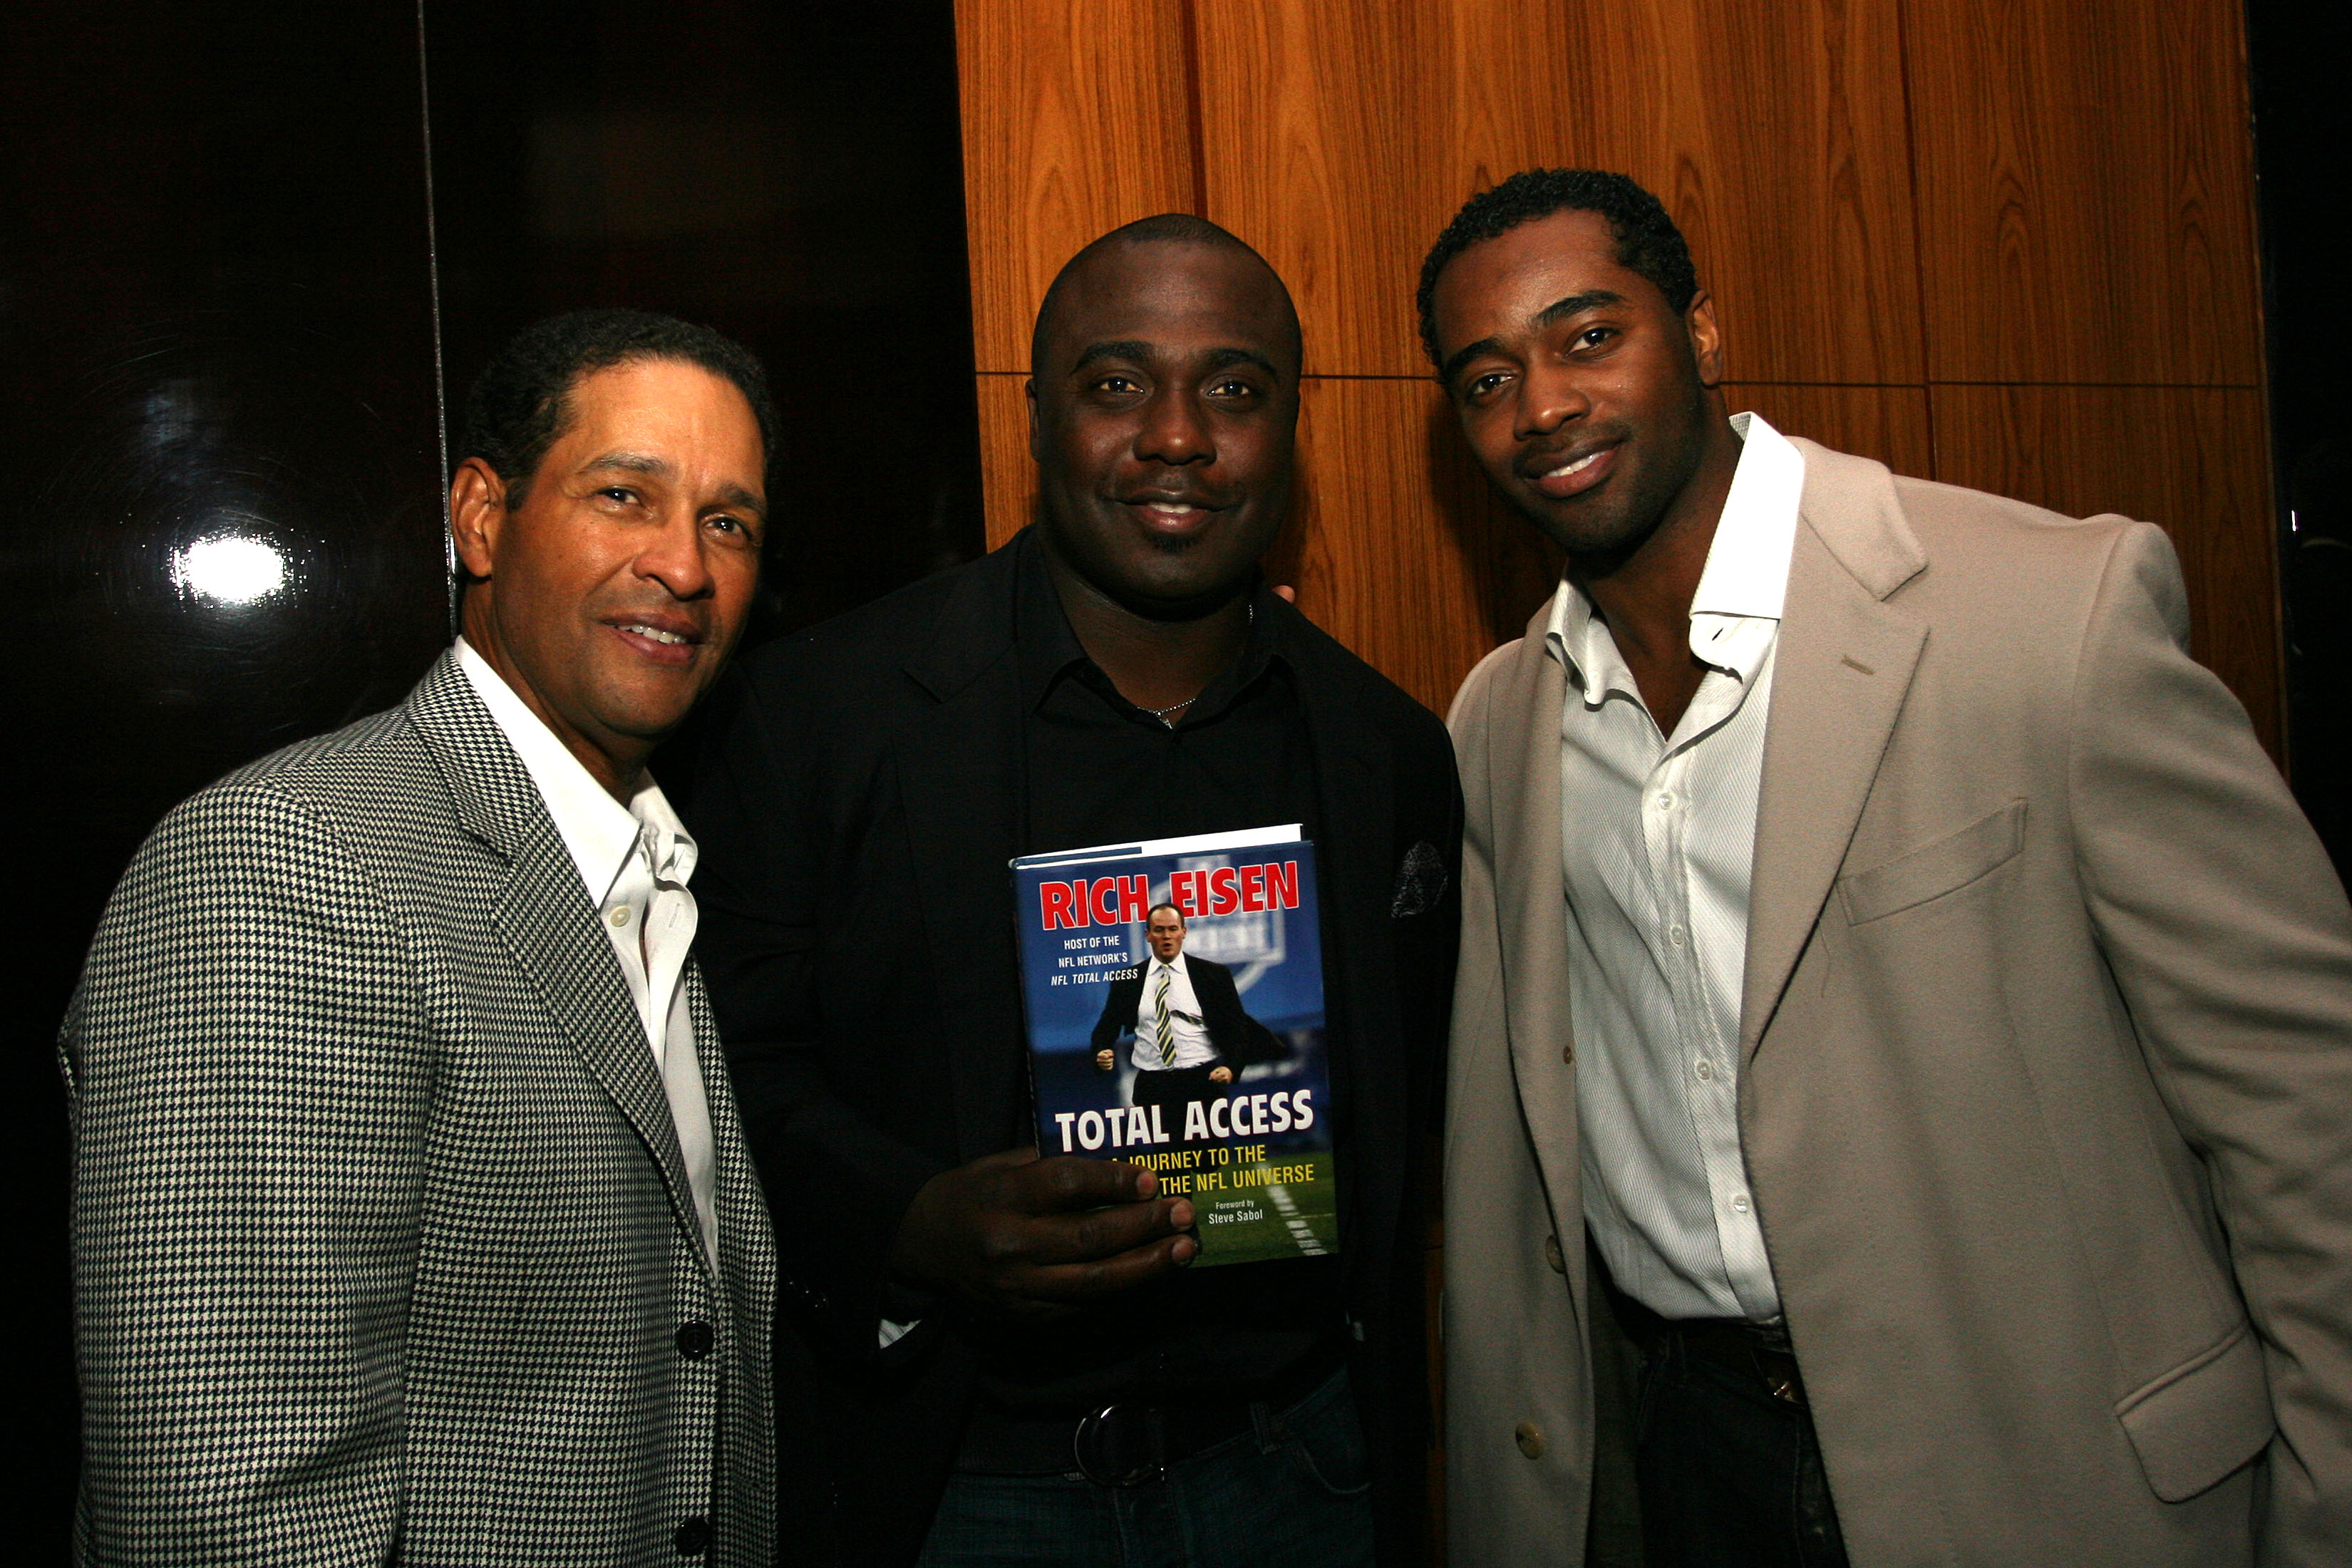 NEW YORK - NOVEMBER 5:  (L-R) Bryant Gumbel, Marshall Faulk and Curtis Martin attend the book launch for Rich Eisen?s 'Total Access' at The Stone Rose Lounge November 5, 2007 in New York. (Photo by Donald Bowers/Getty Images for Rich Eisen)